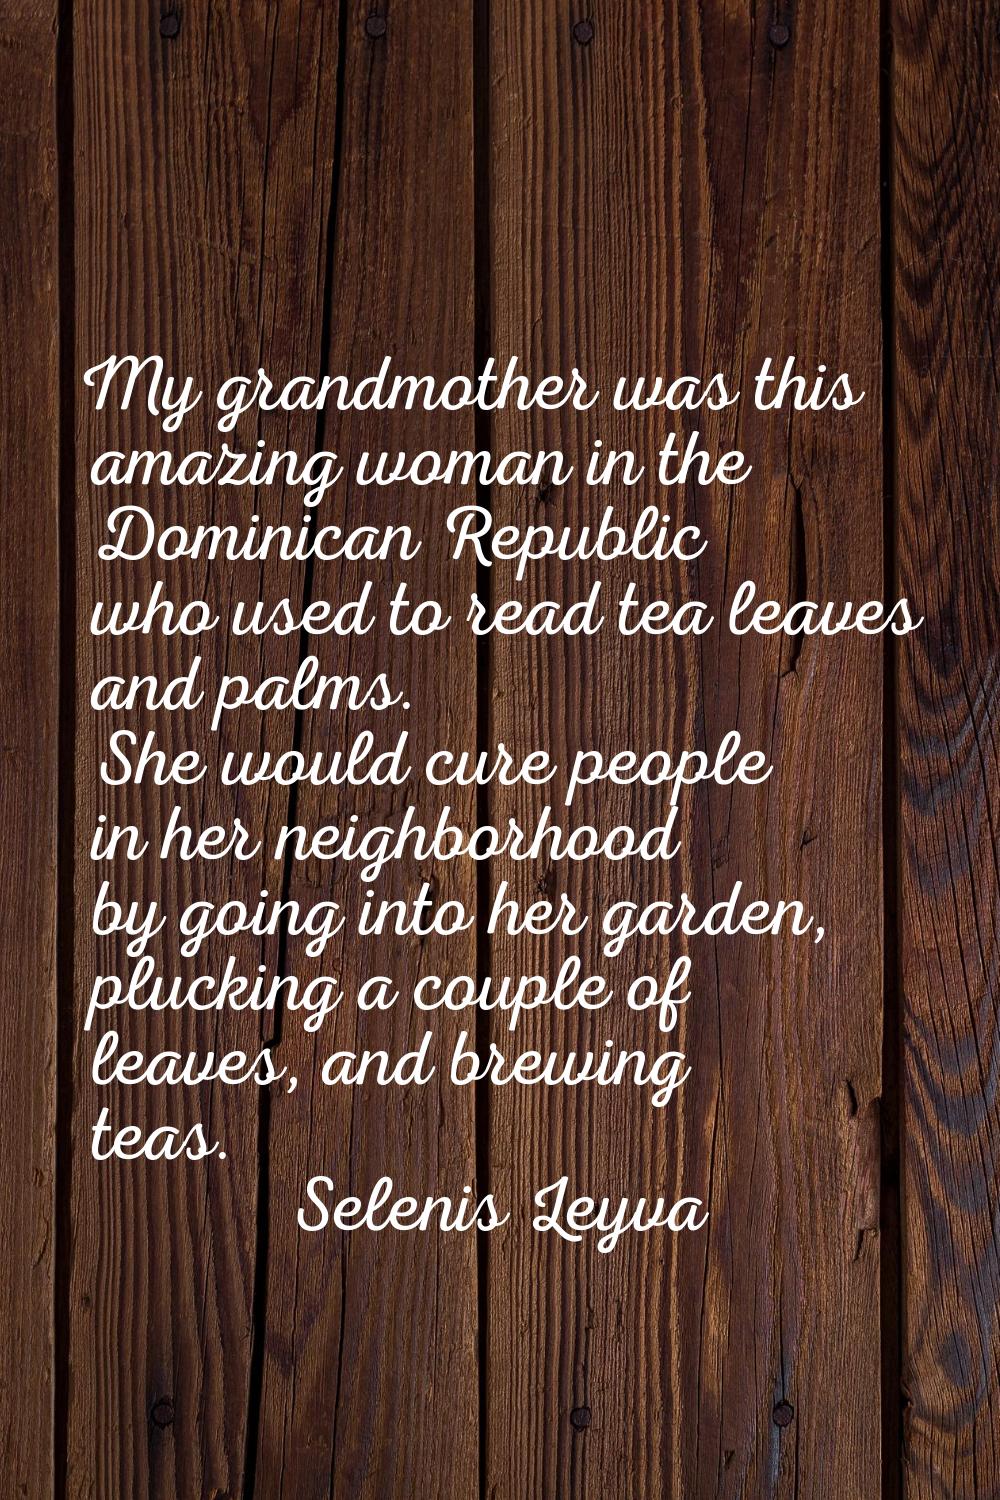 My grandmother was this amazing woman in the Dominican Republic who used to read tea leaves and pal